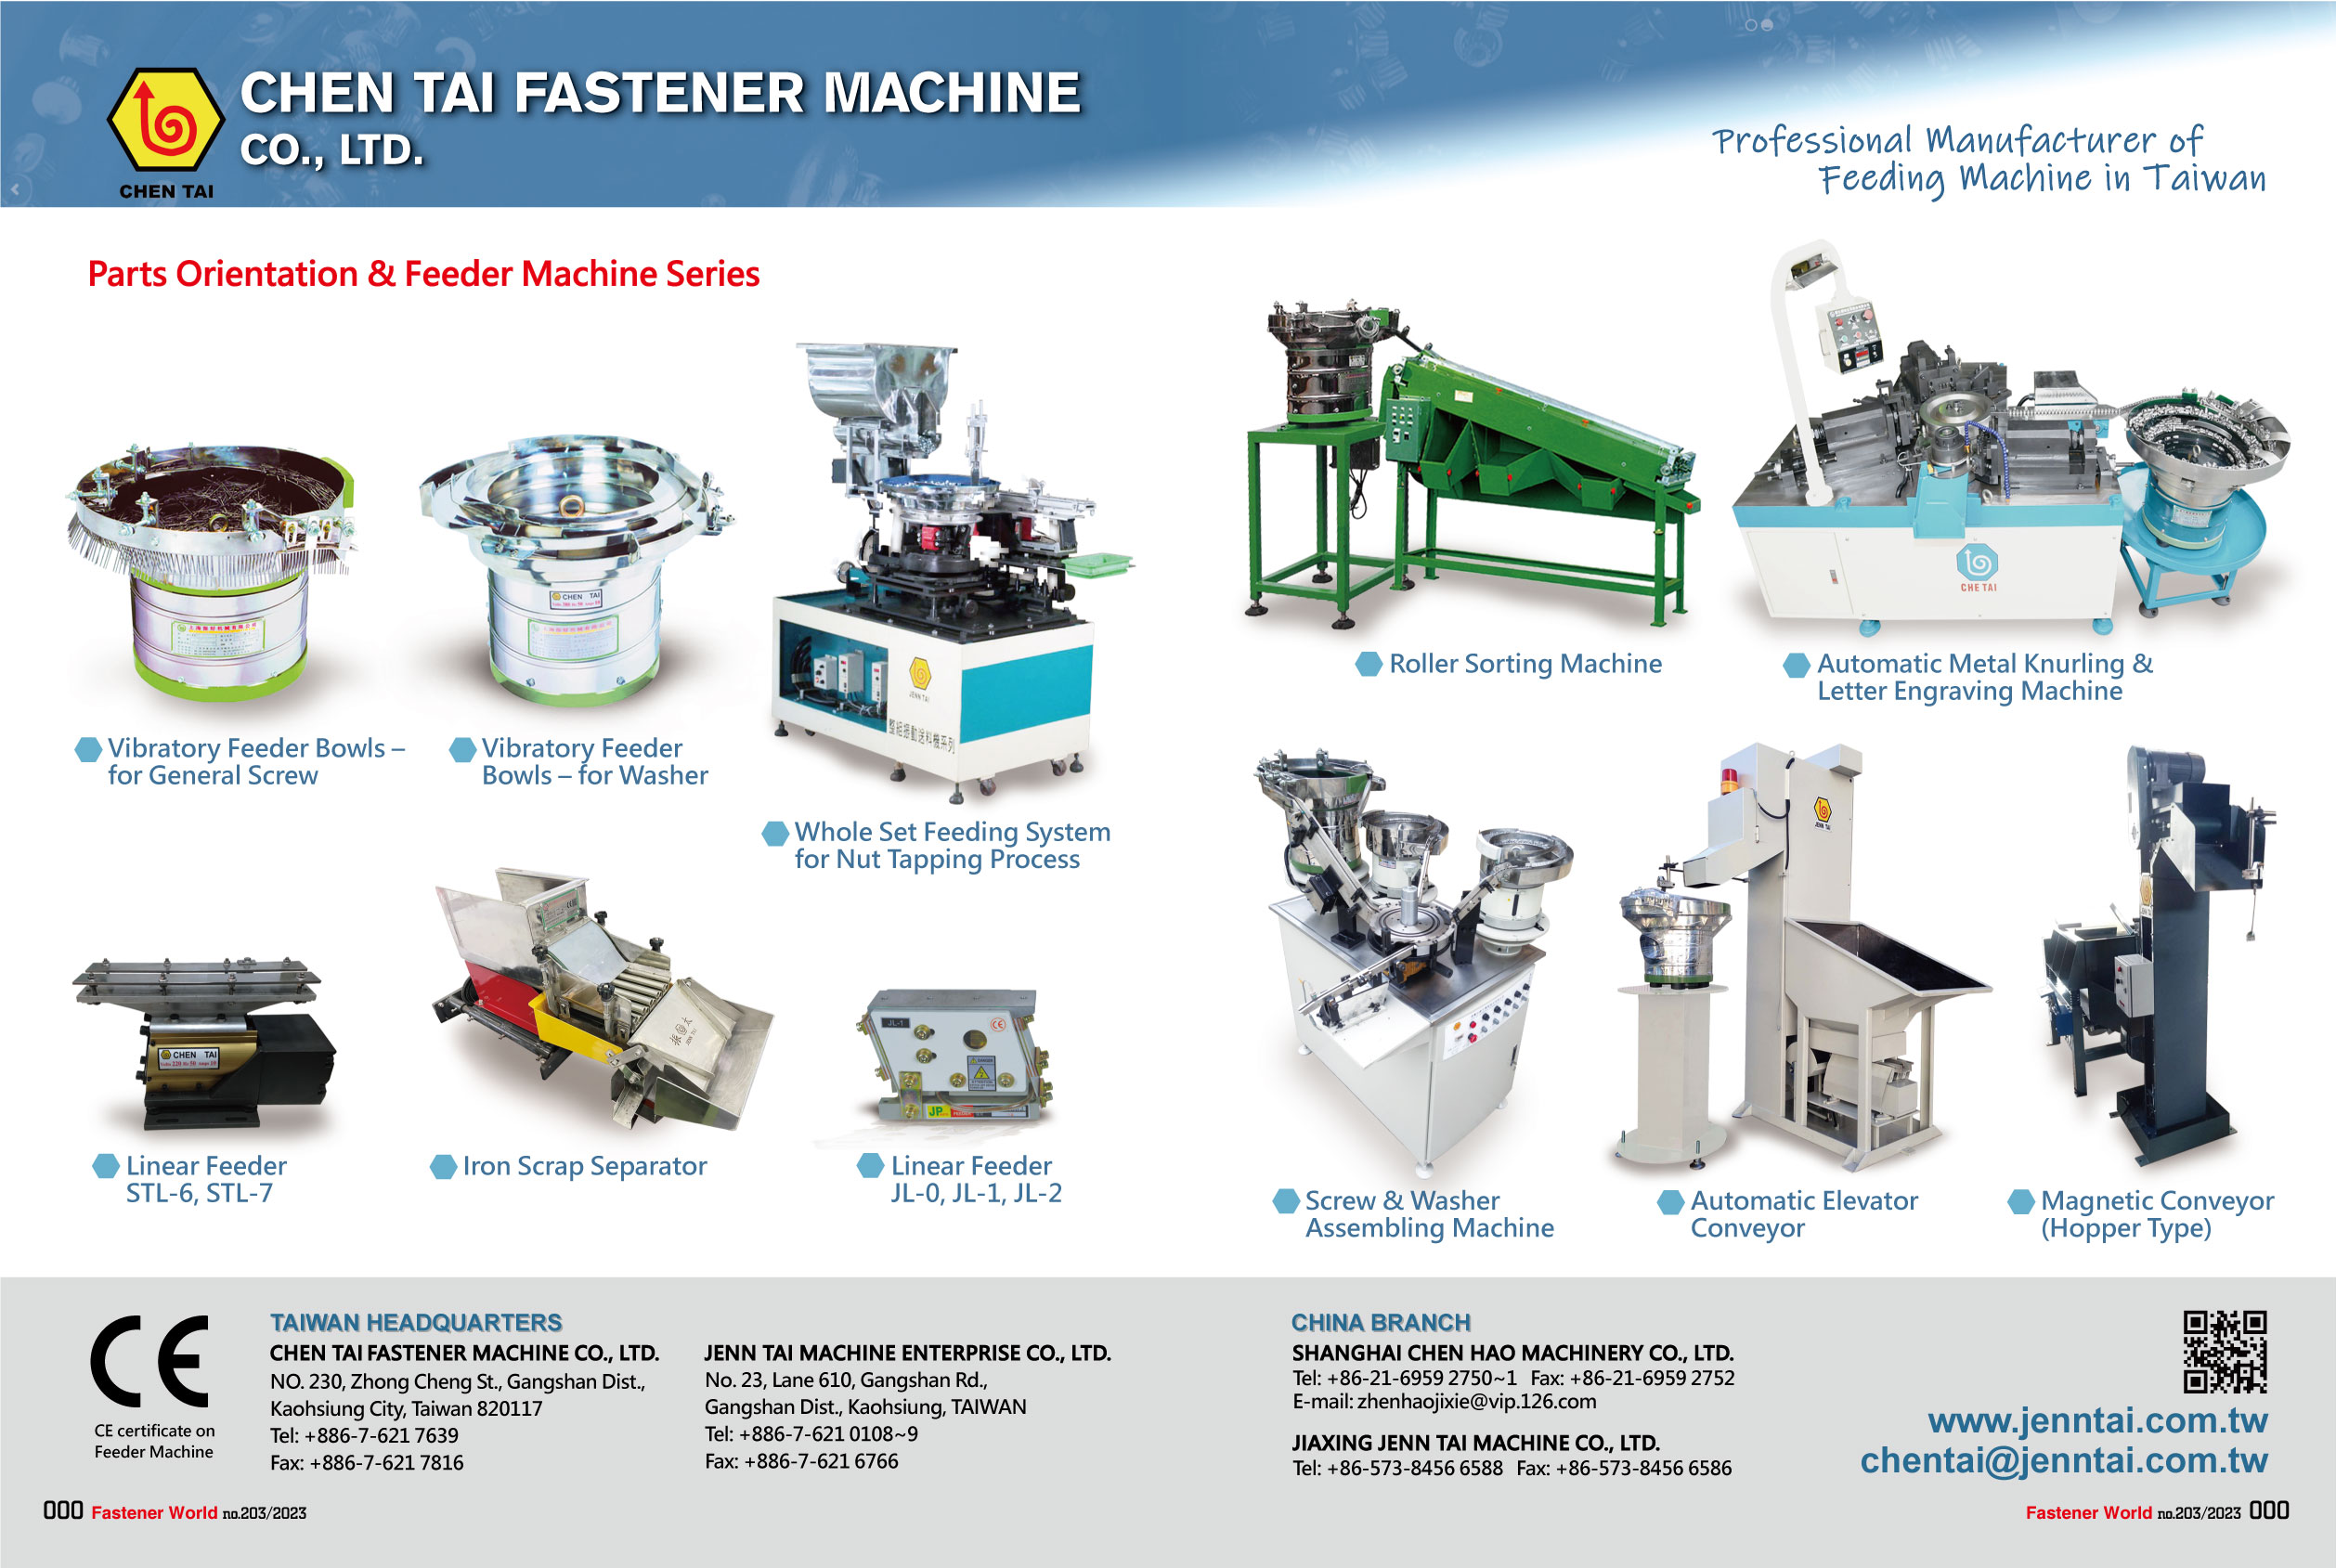 CHEN TAI FASTENER MACHINE CO., LTD. , Parts Orientation & Feeder Machine Series: Vibratory Feeder Bowls, Whole Set Feeding System for Nut Tapping Process, Linear Feeder, Scrap Sorting Machine Roller Sorting Machine, Automatic Metal Knurling & Letter Engraving Machine, Screw & Washer Assembling Machine, Automatic Elevator Conveyor, Magnetic Conveyor